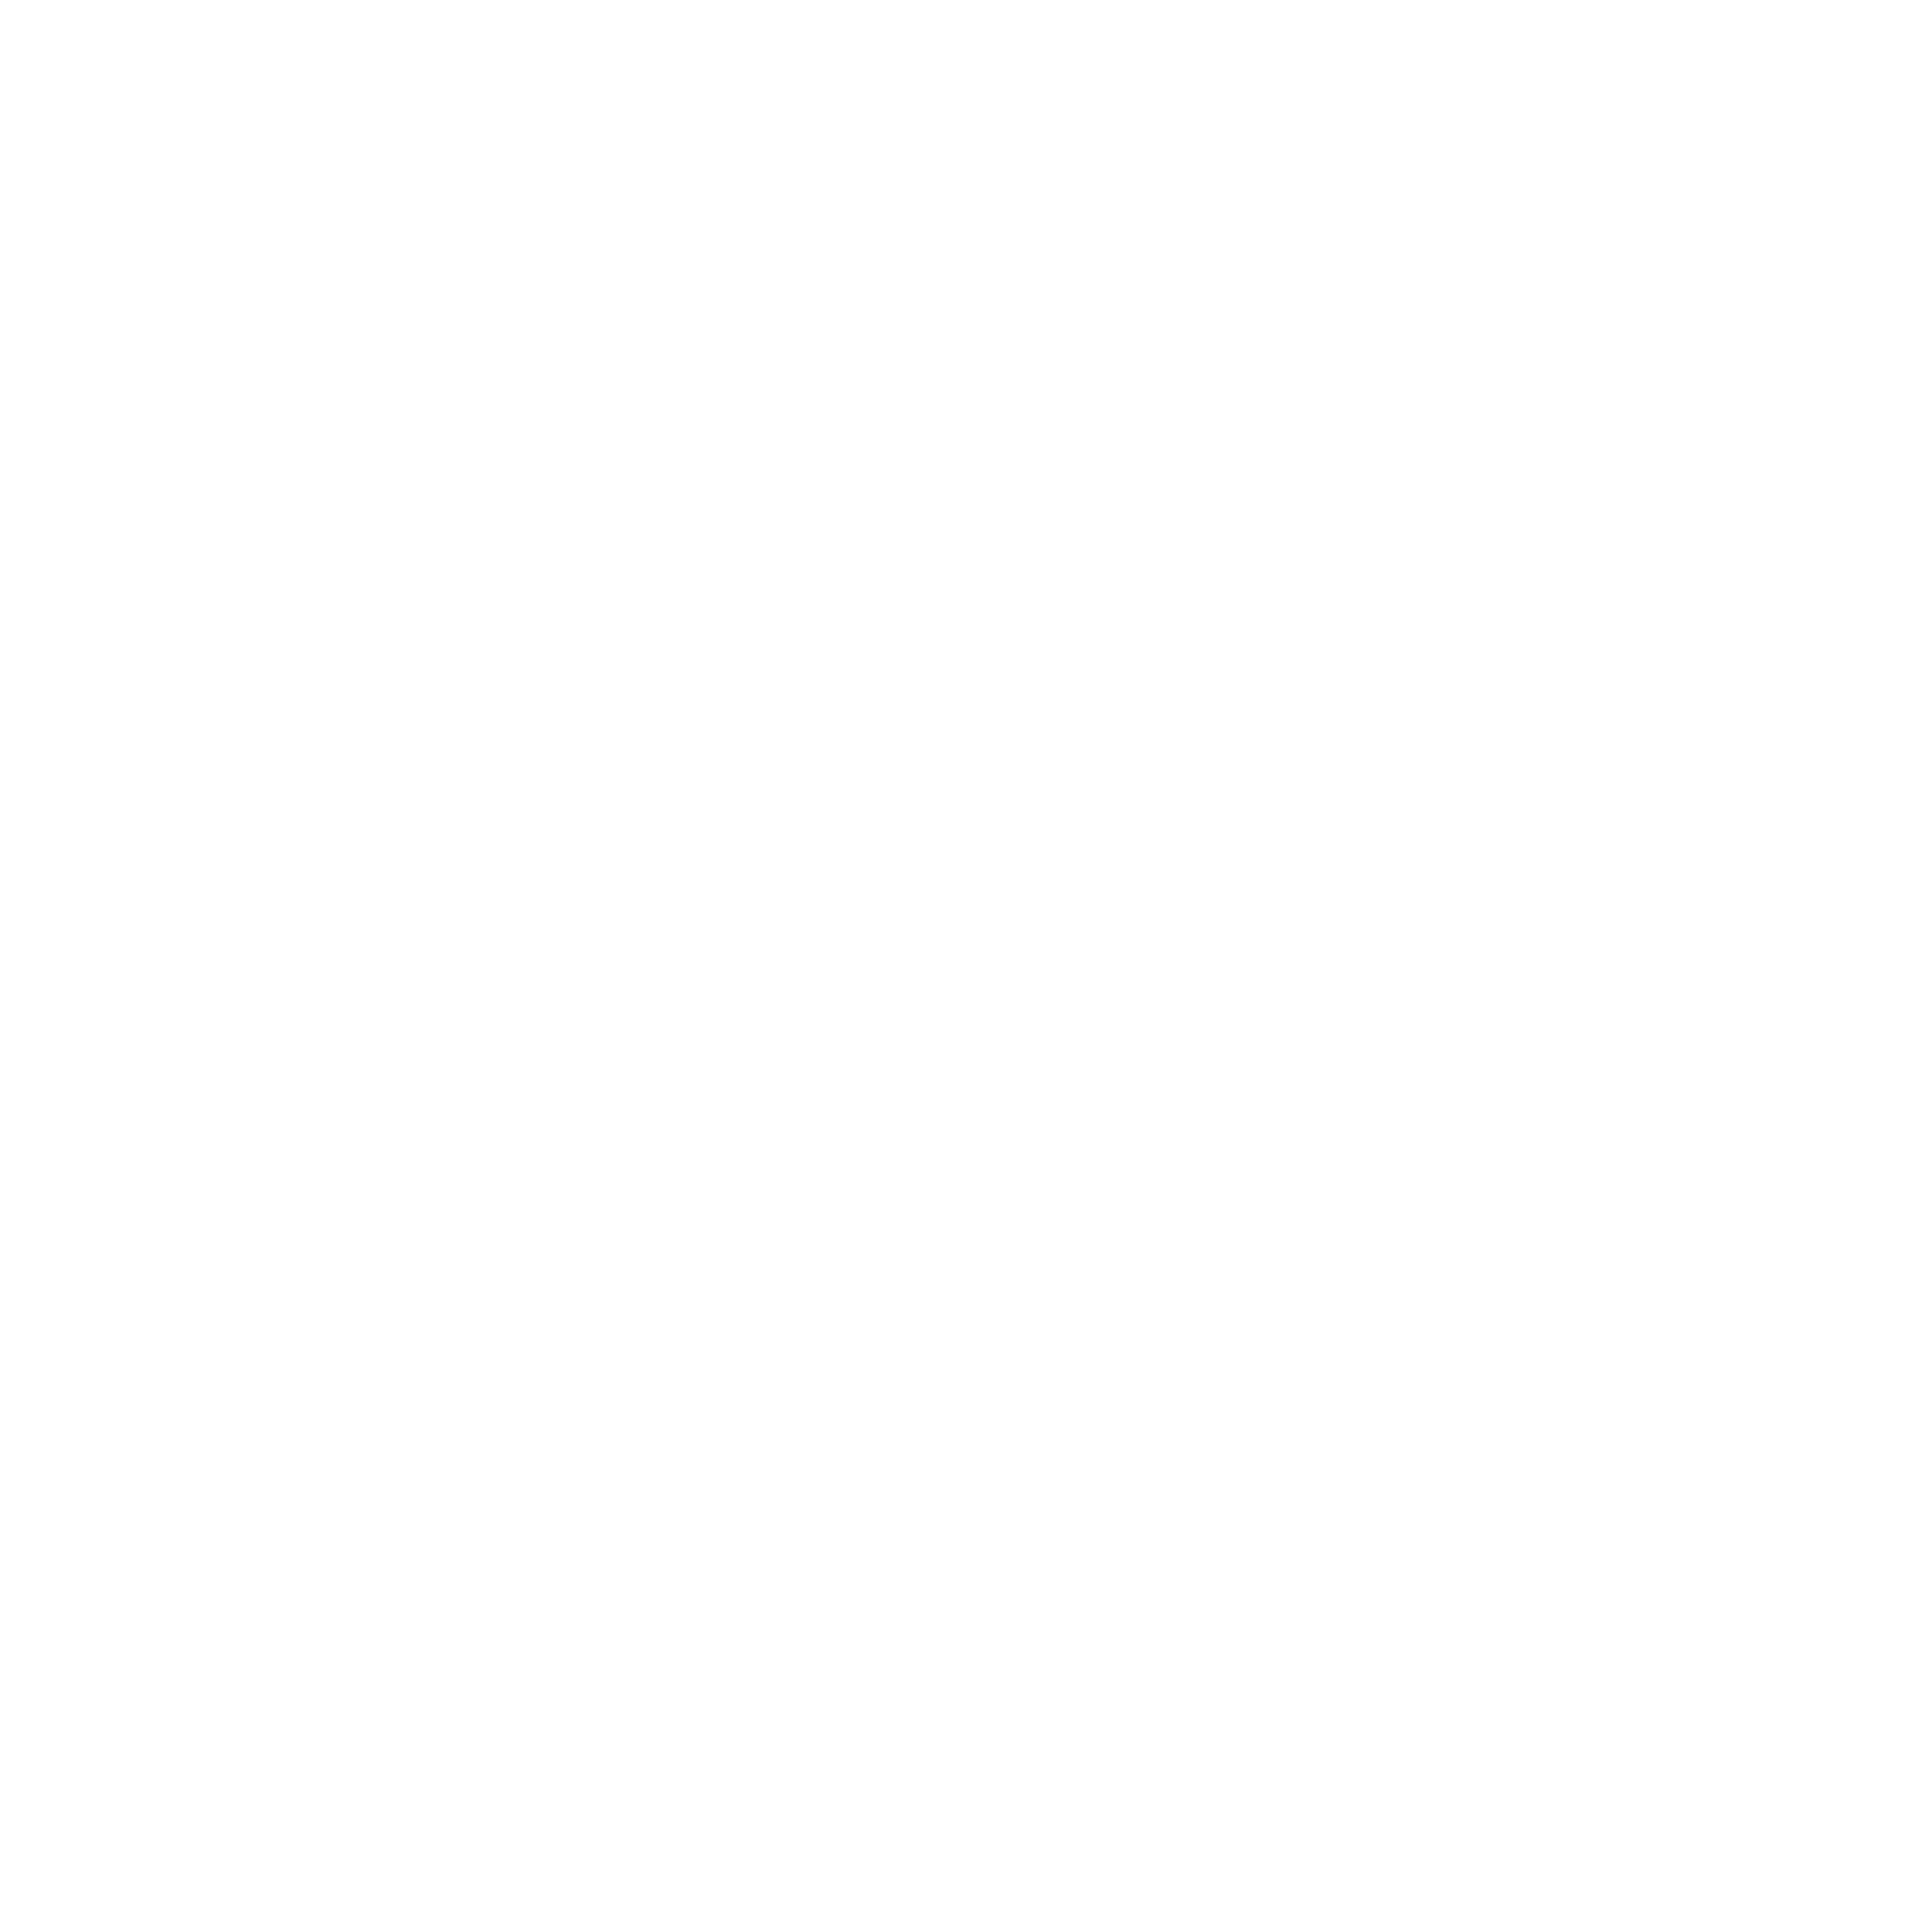 Download Mercedes Benz Logo Black And White Ps4 Logo White Transparent Png Image With No Background Pngkey Com